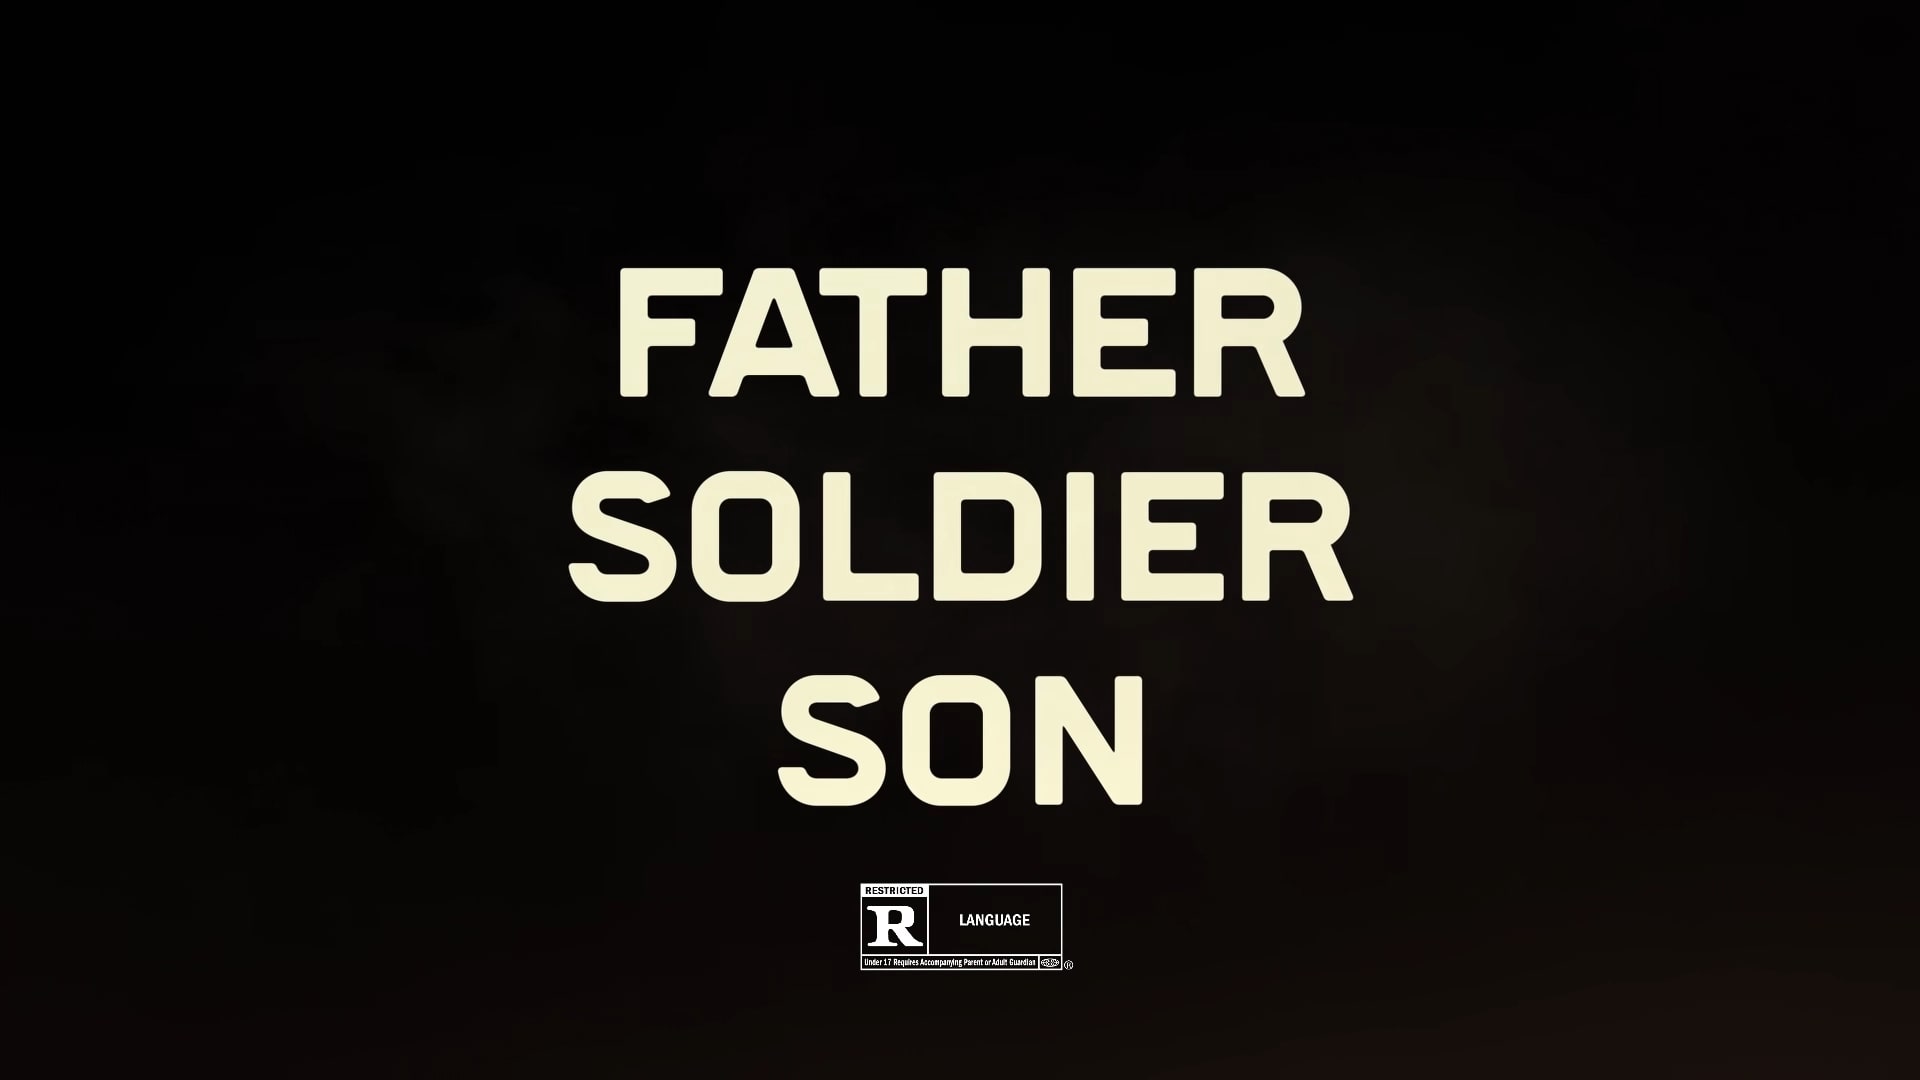 Netflix Documentary Father Soldier Son, Netflix War Movies, Coming to Netflix in July 2020